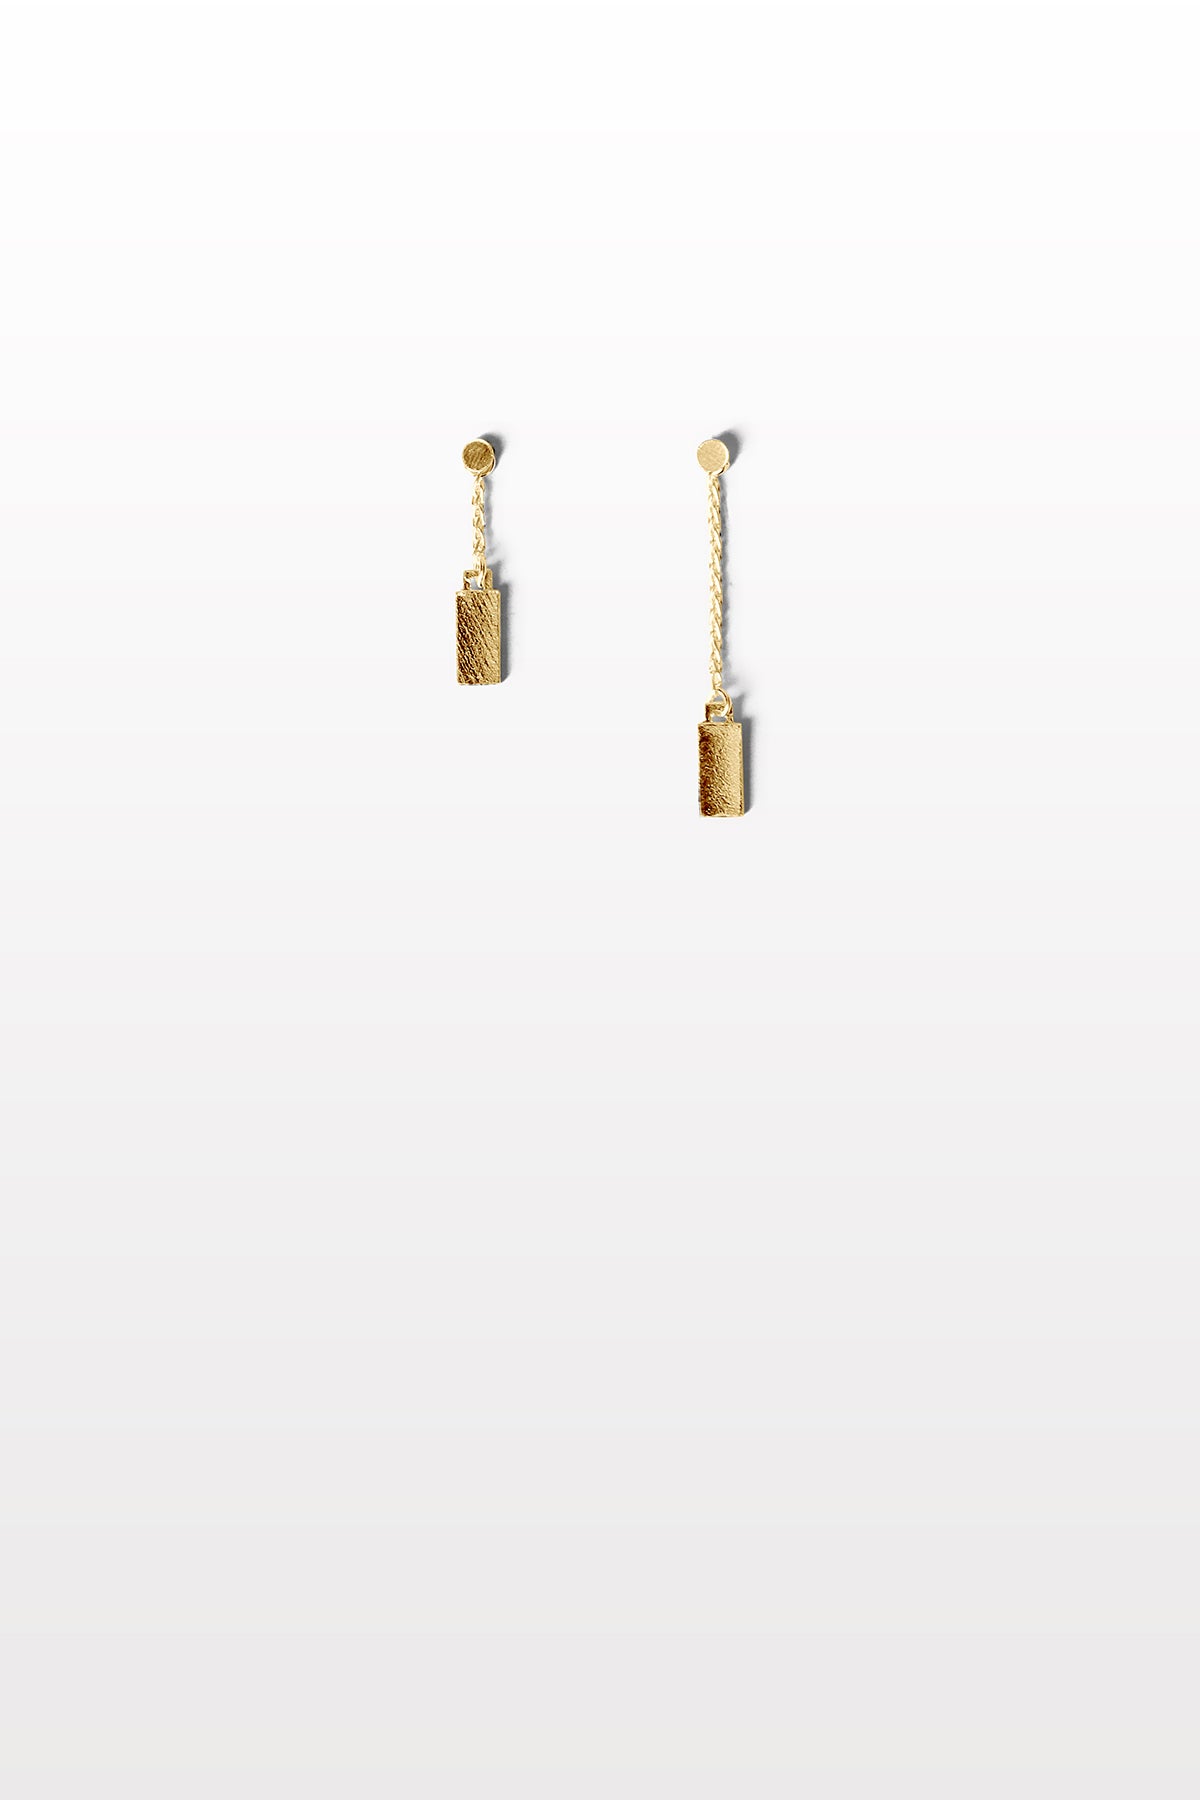 Stereotype Earring 06 Gold Plated Silver